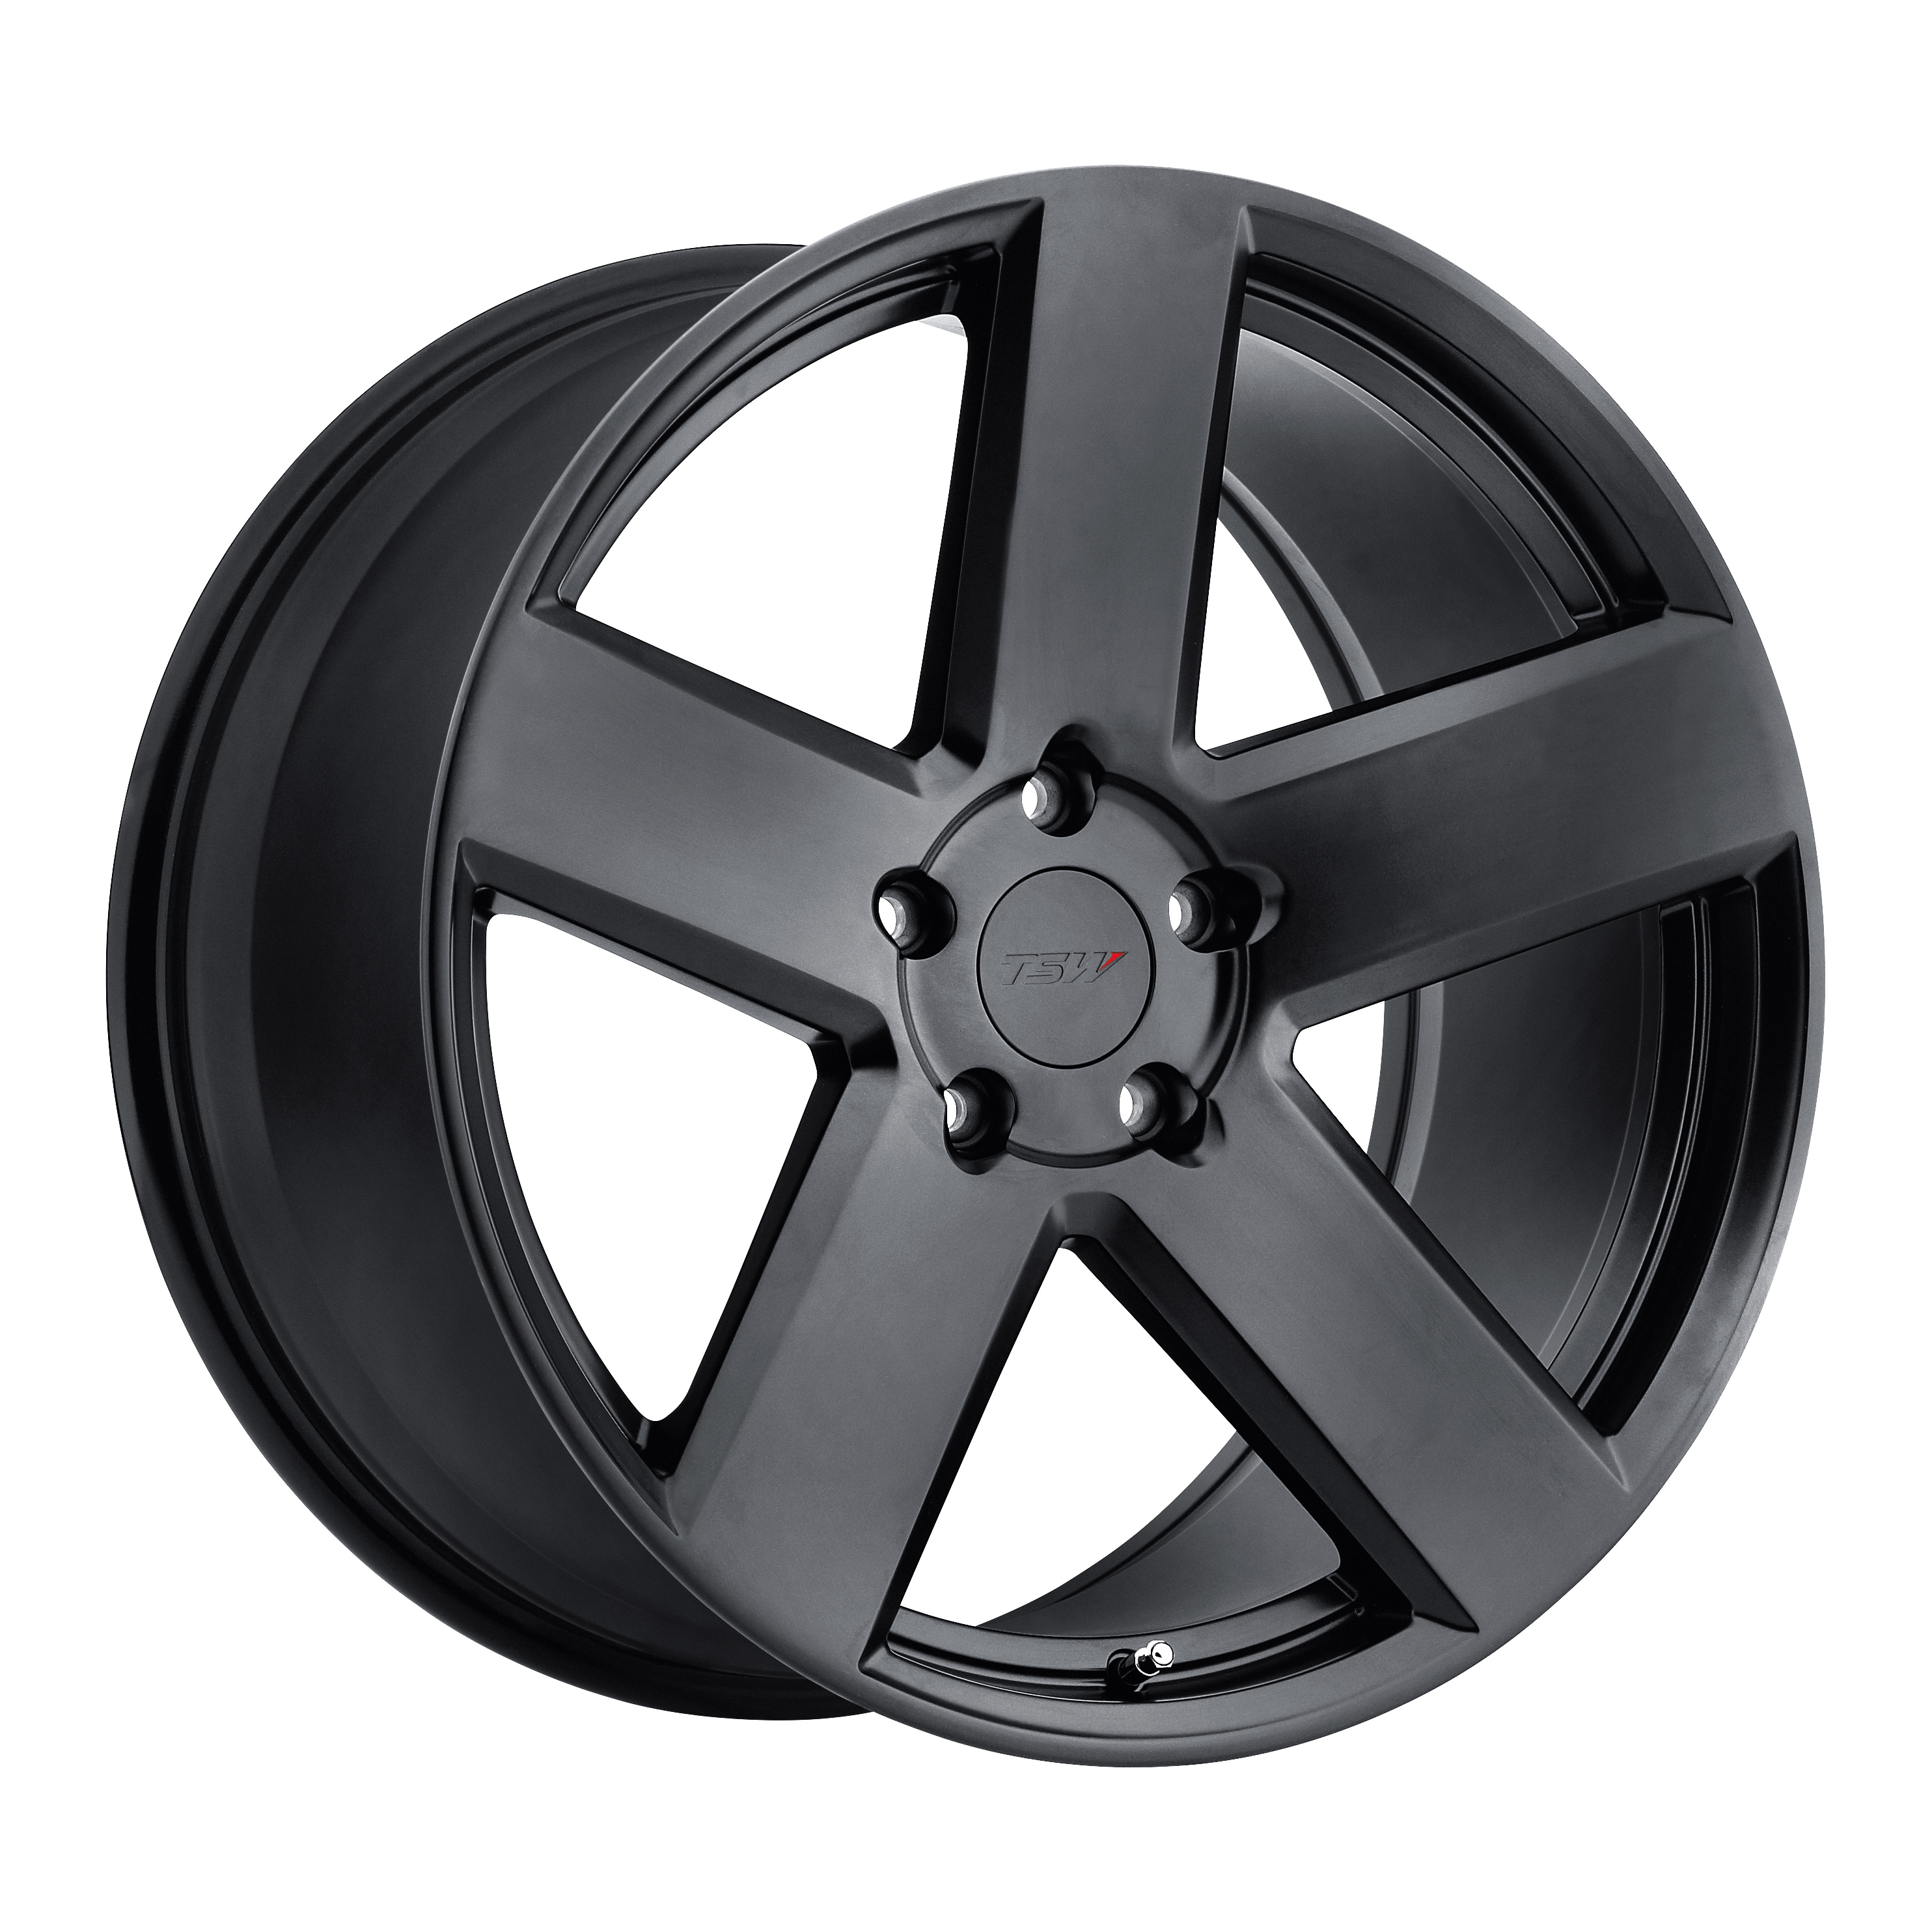 BRISTOL  WHEELS AND RIMS PACKAGES